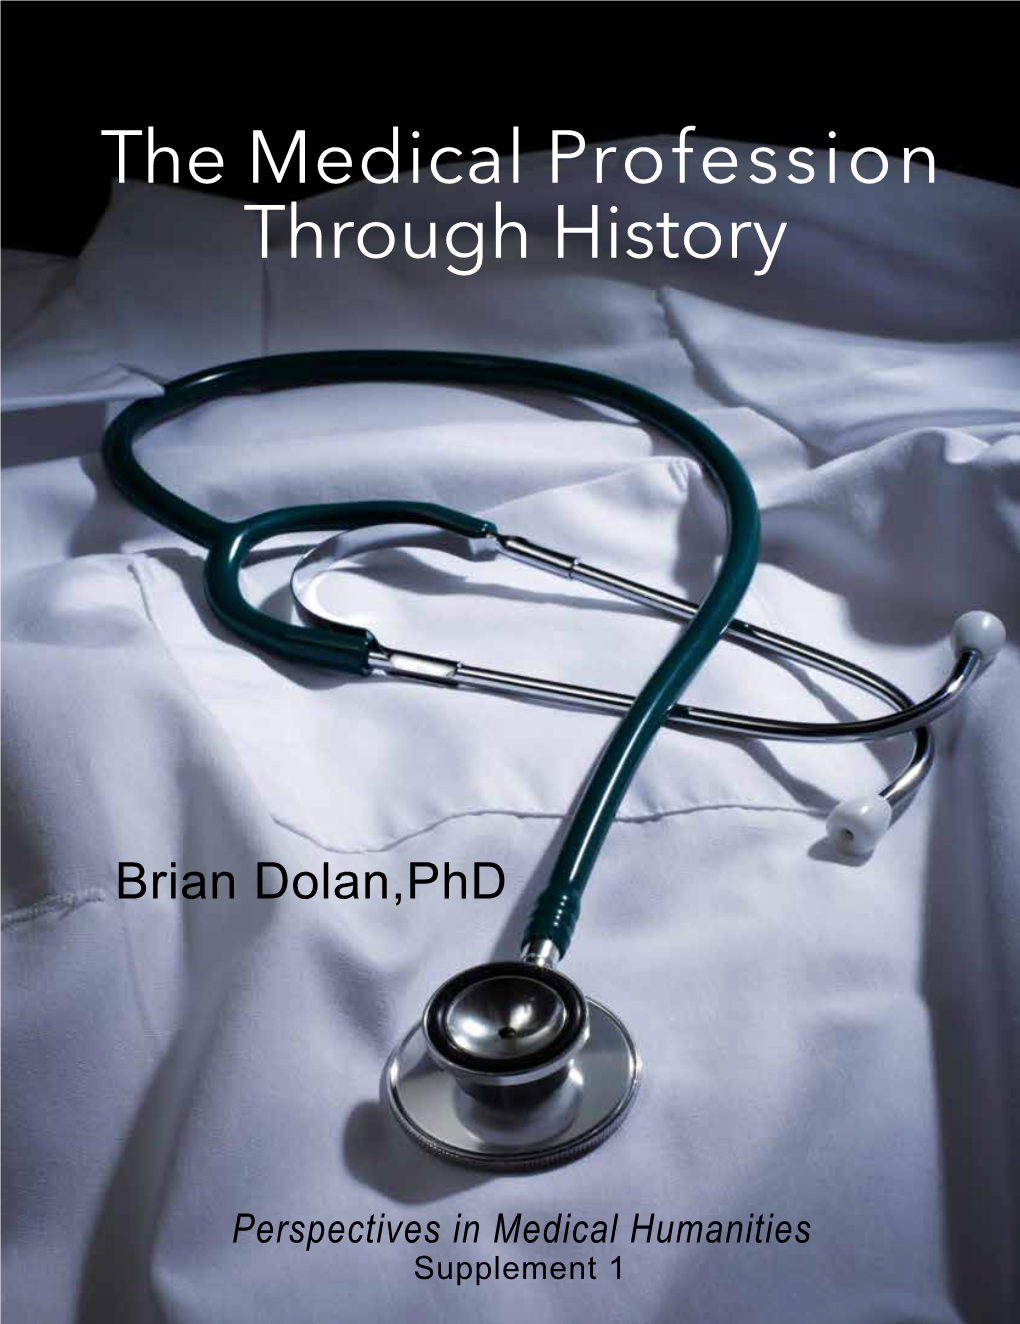 The Medical Profession Through History